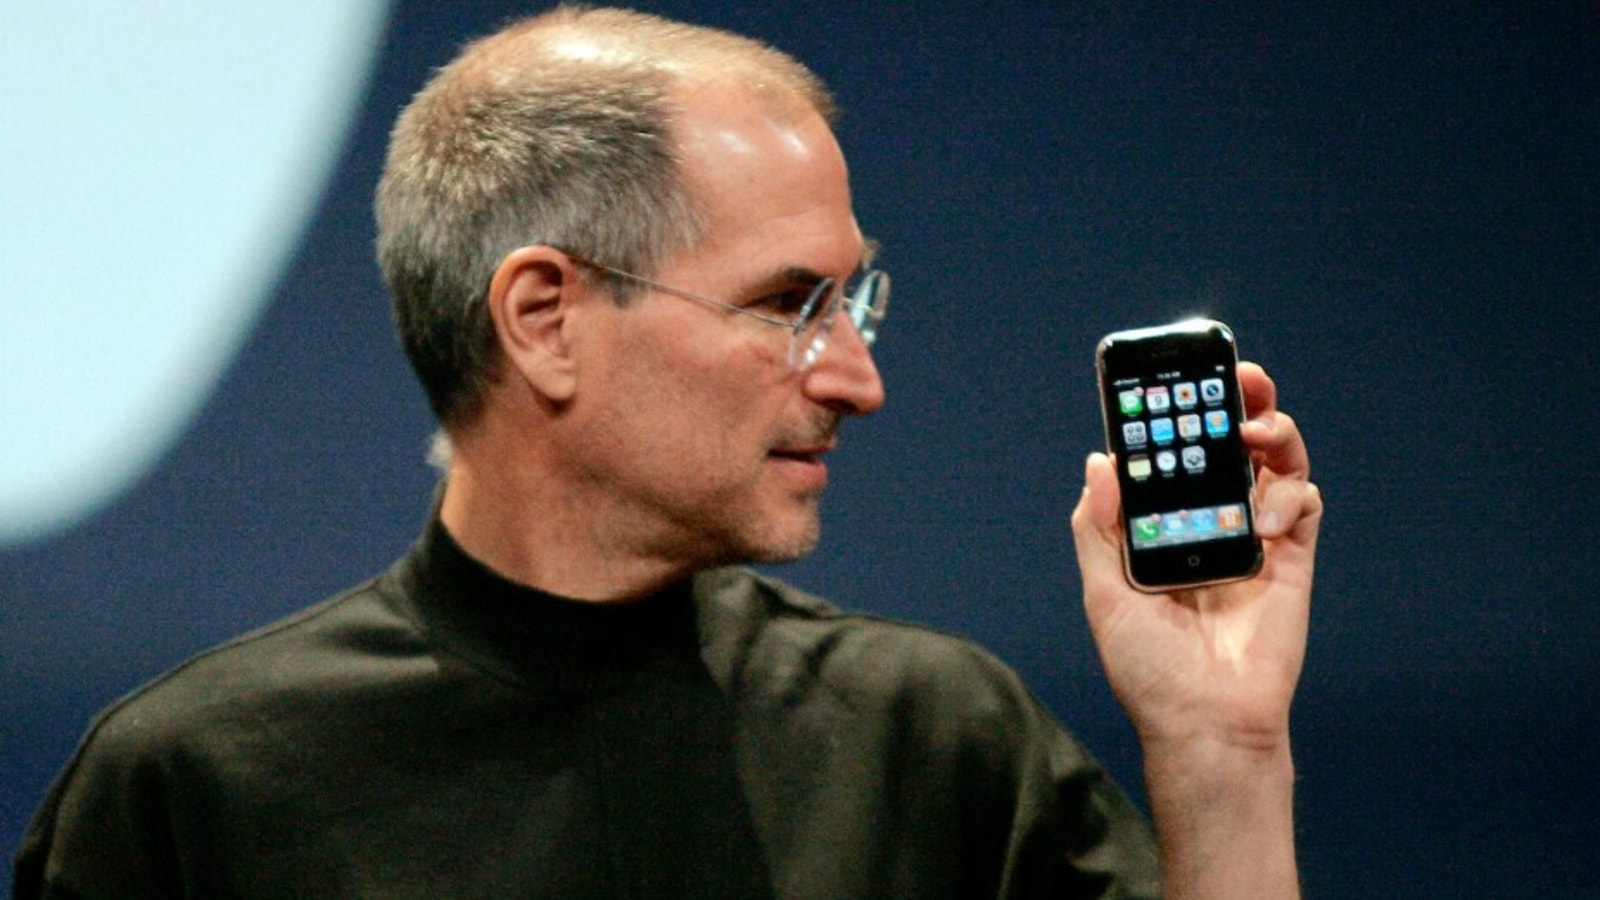 FIRST iPhone launch was by Steve Jobs today, 16 years ago; check iPhone